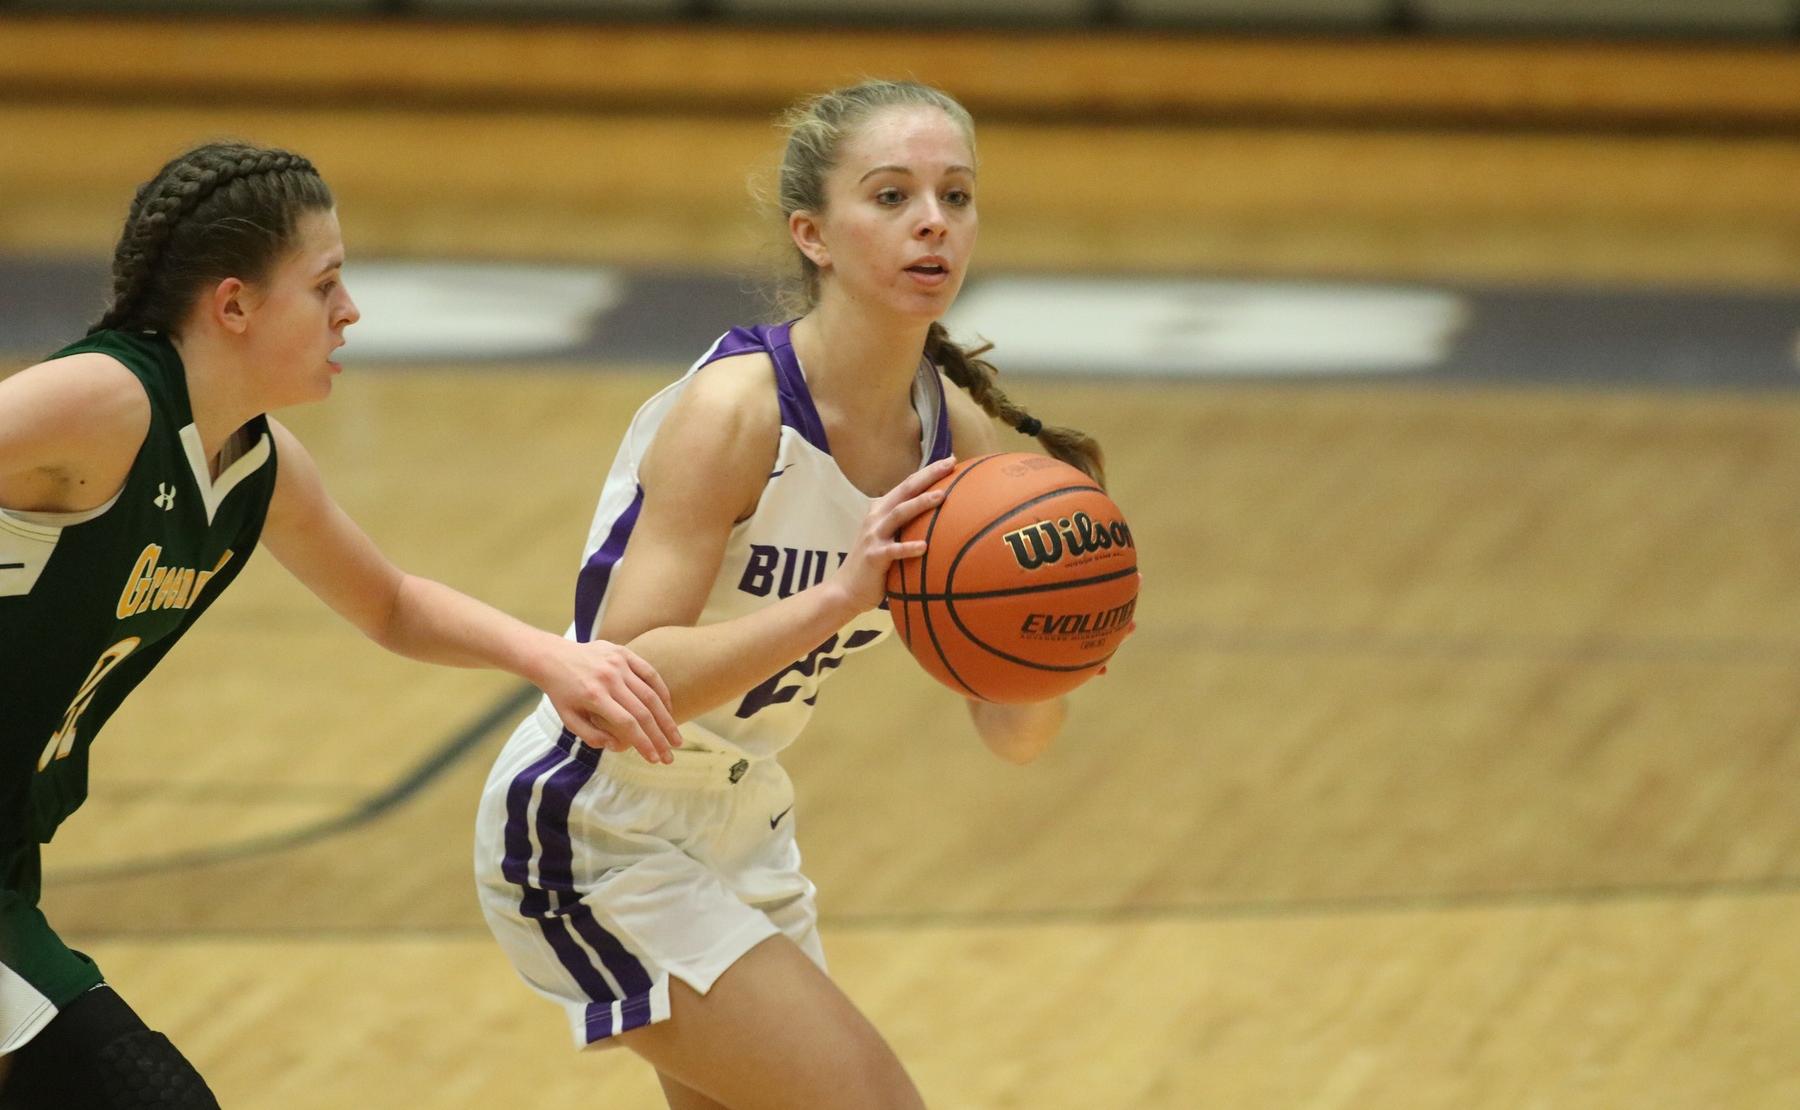 No. 8/8 @bhsdogsghoops set to play Hamilton Heights to open season